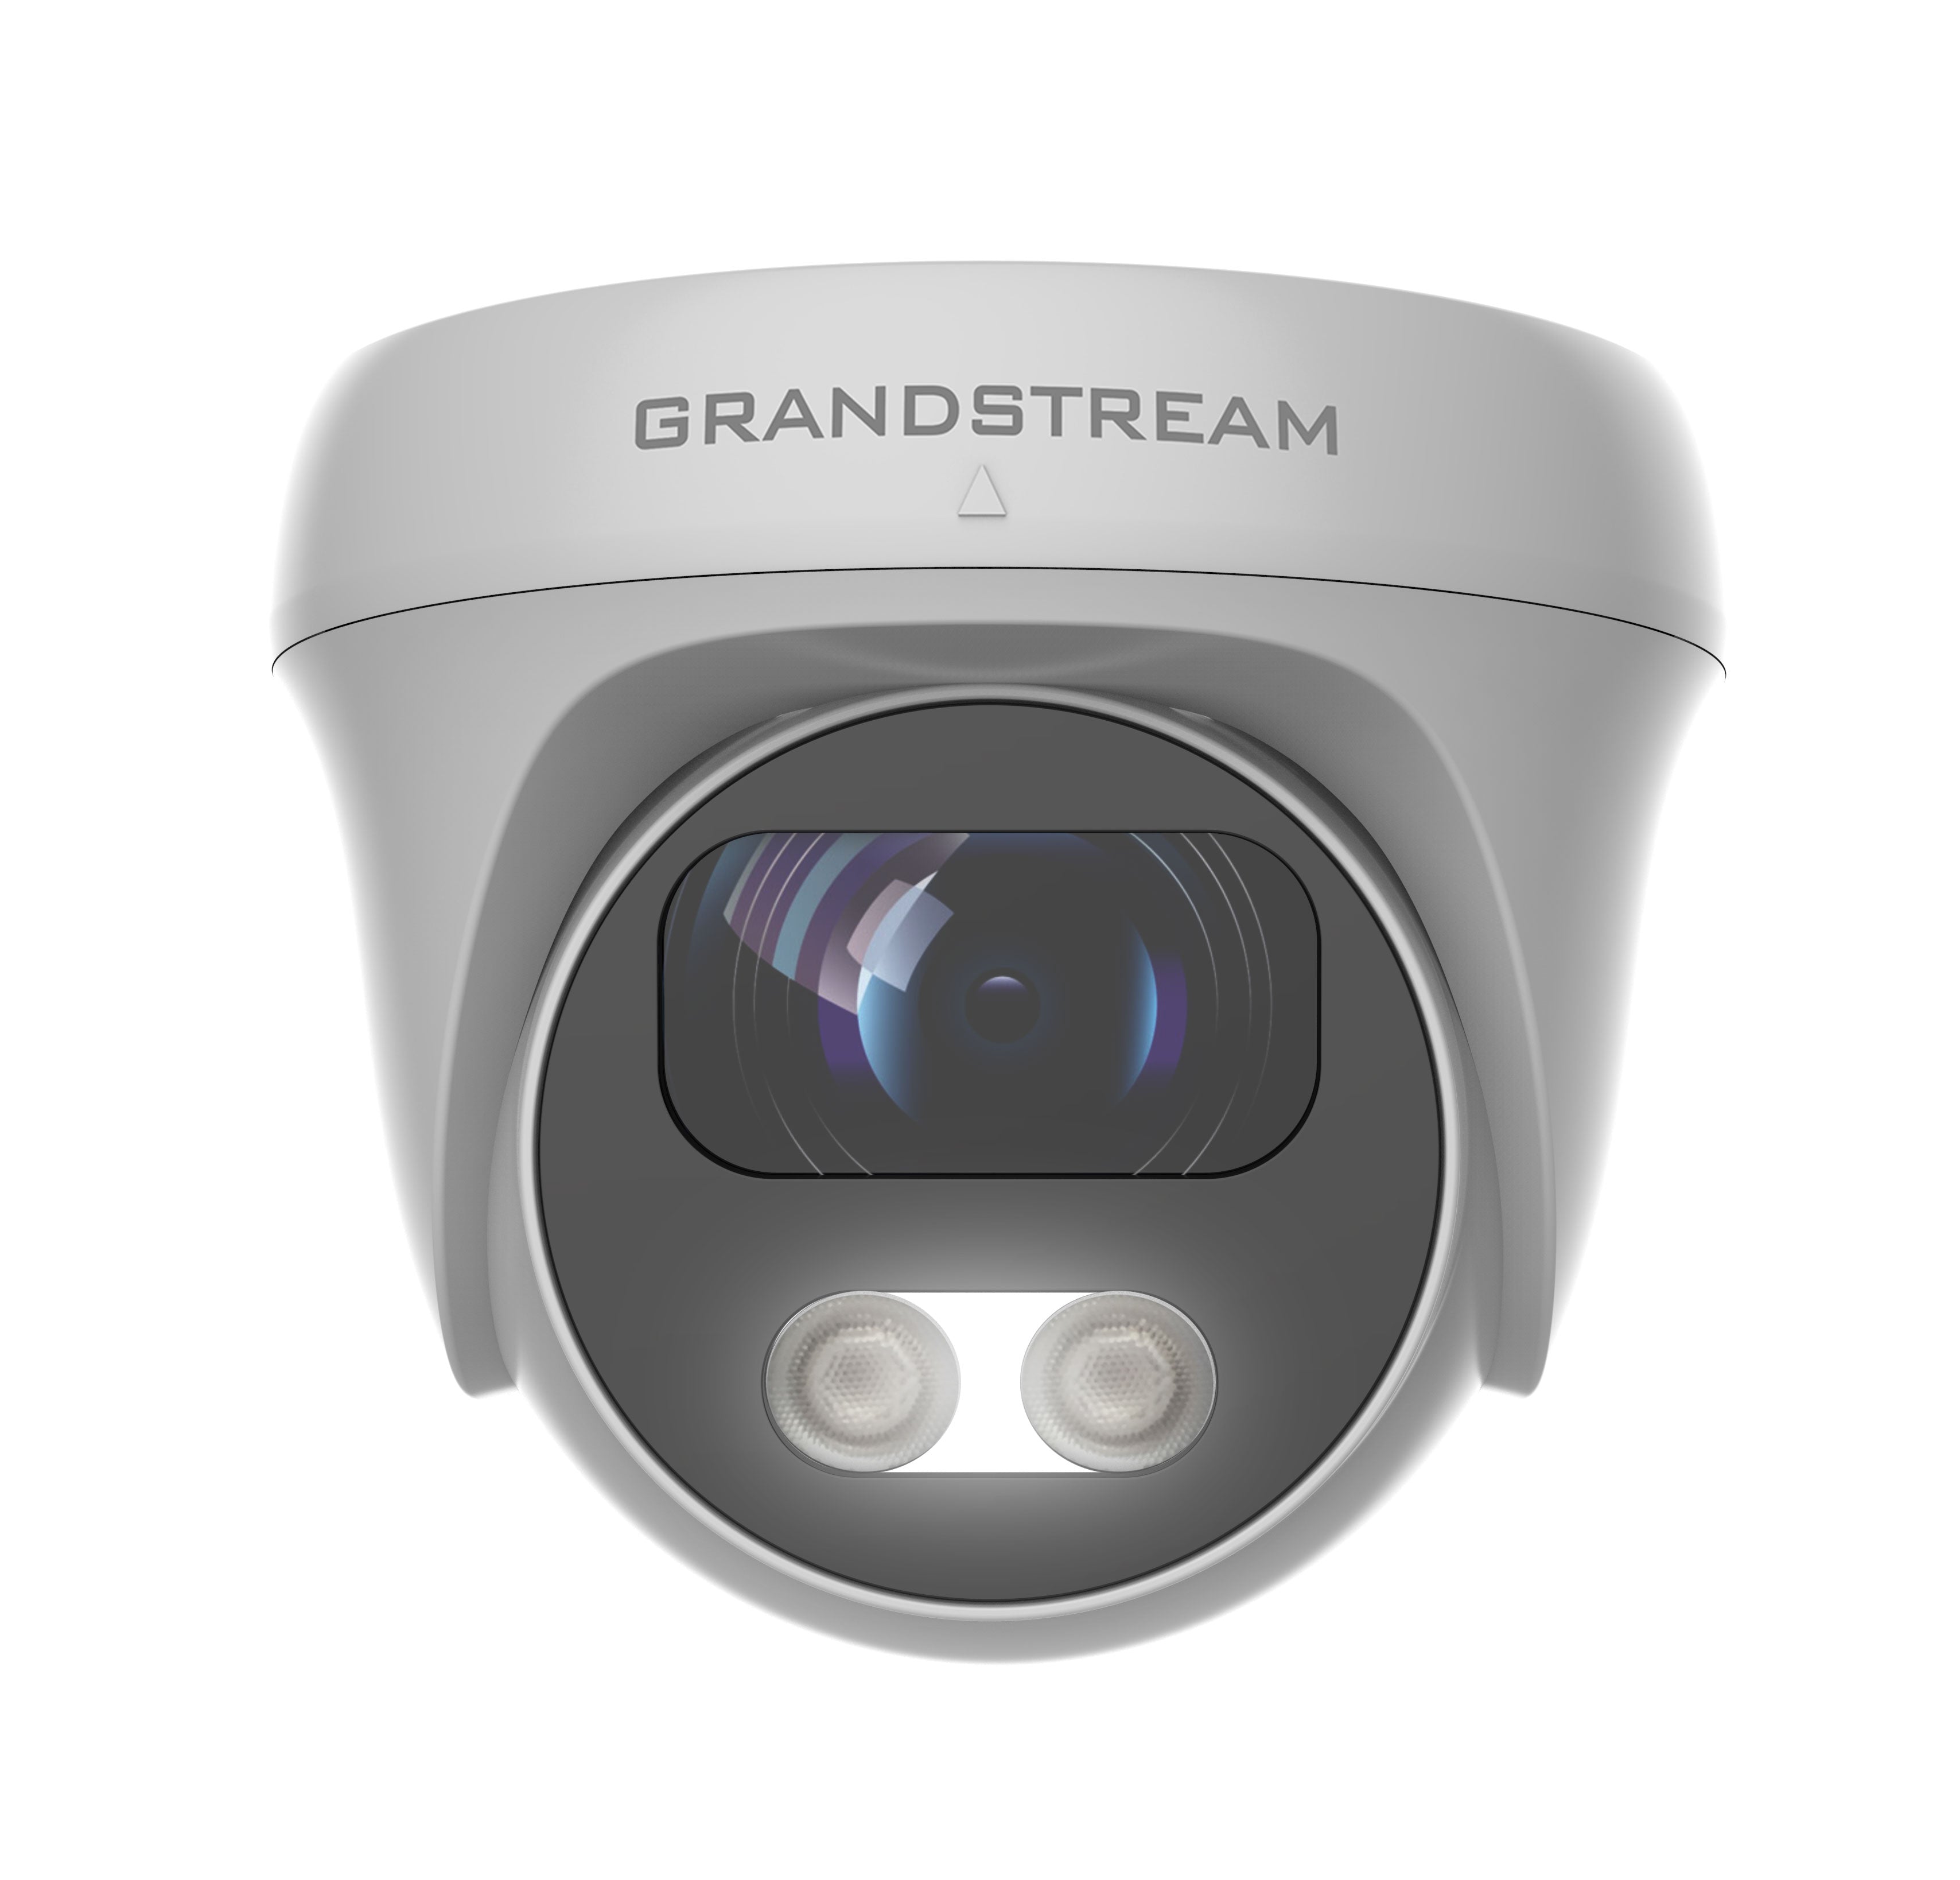 Grandstream GSC3610 Infrared Waterproof Dome Camera, 3.6mm lens, 1080p Resolution, PoE Powered, IP67, HD Voice Quality-0